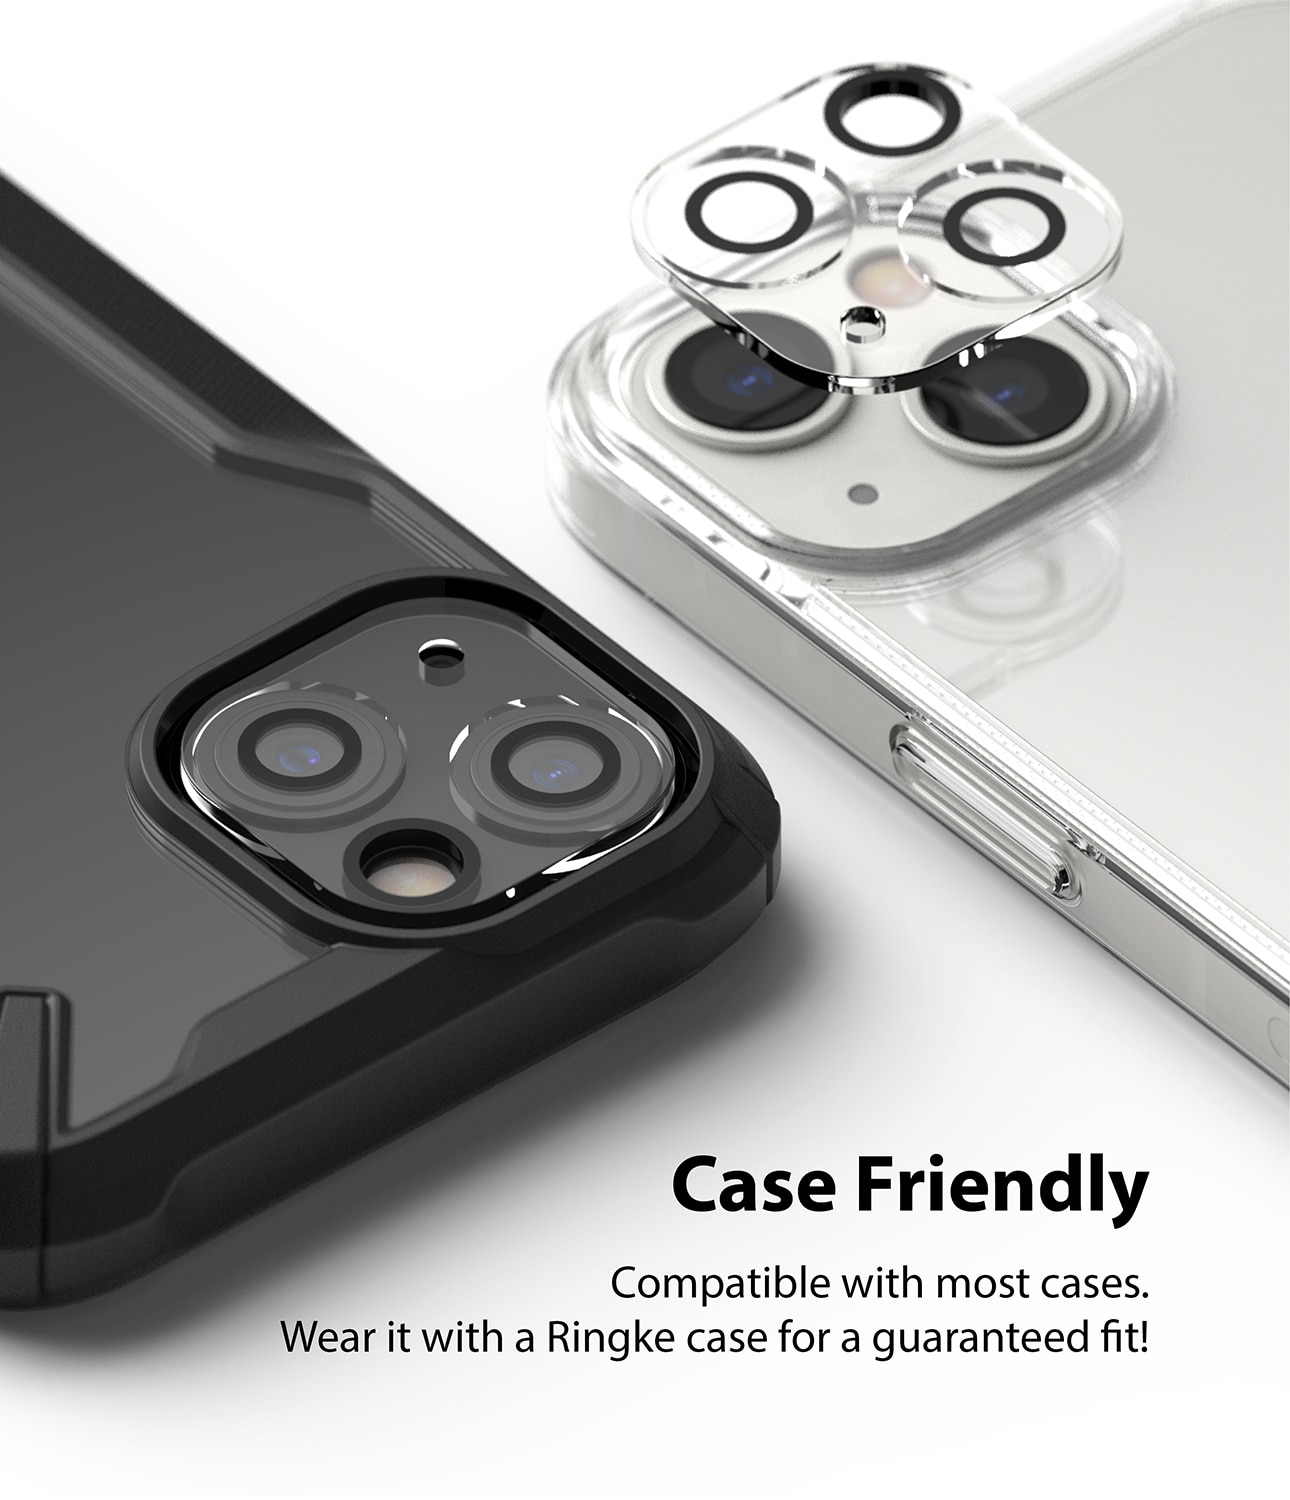 Camera Protector Glass iPhone 13 (2-pack)